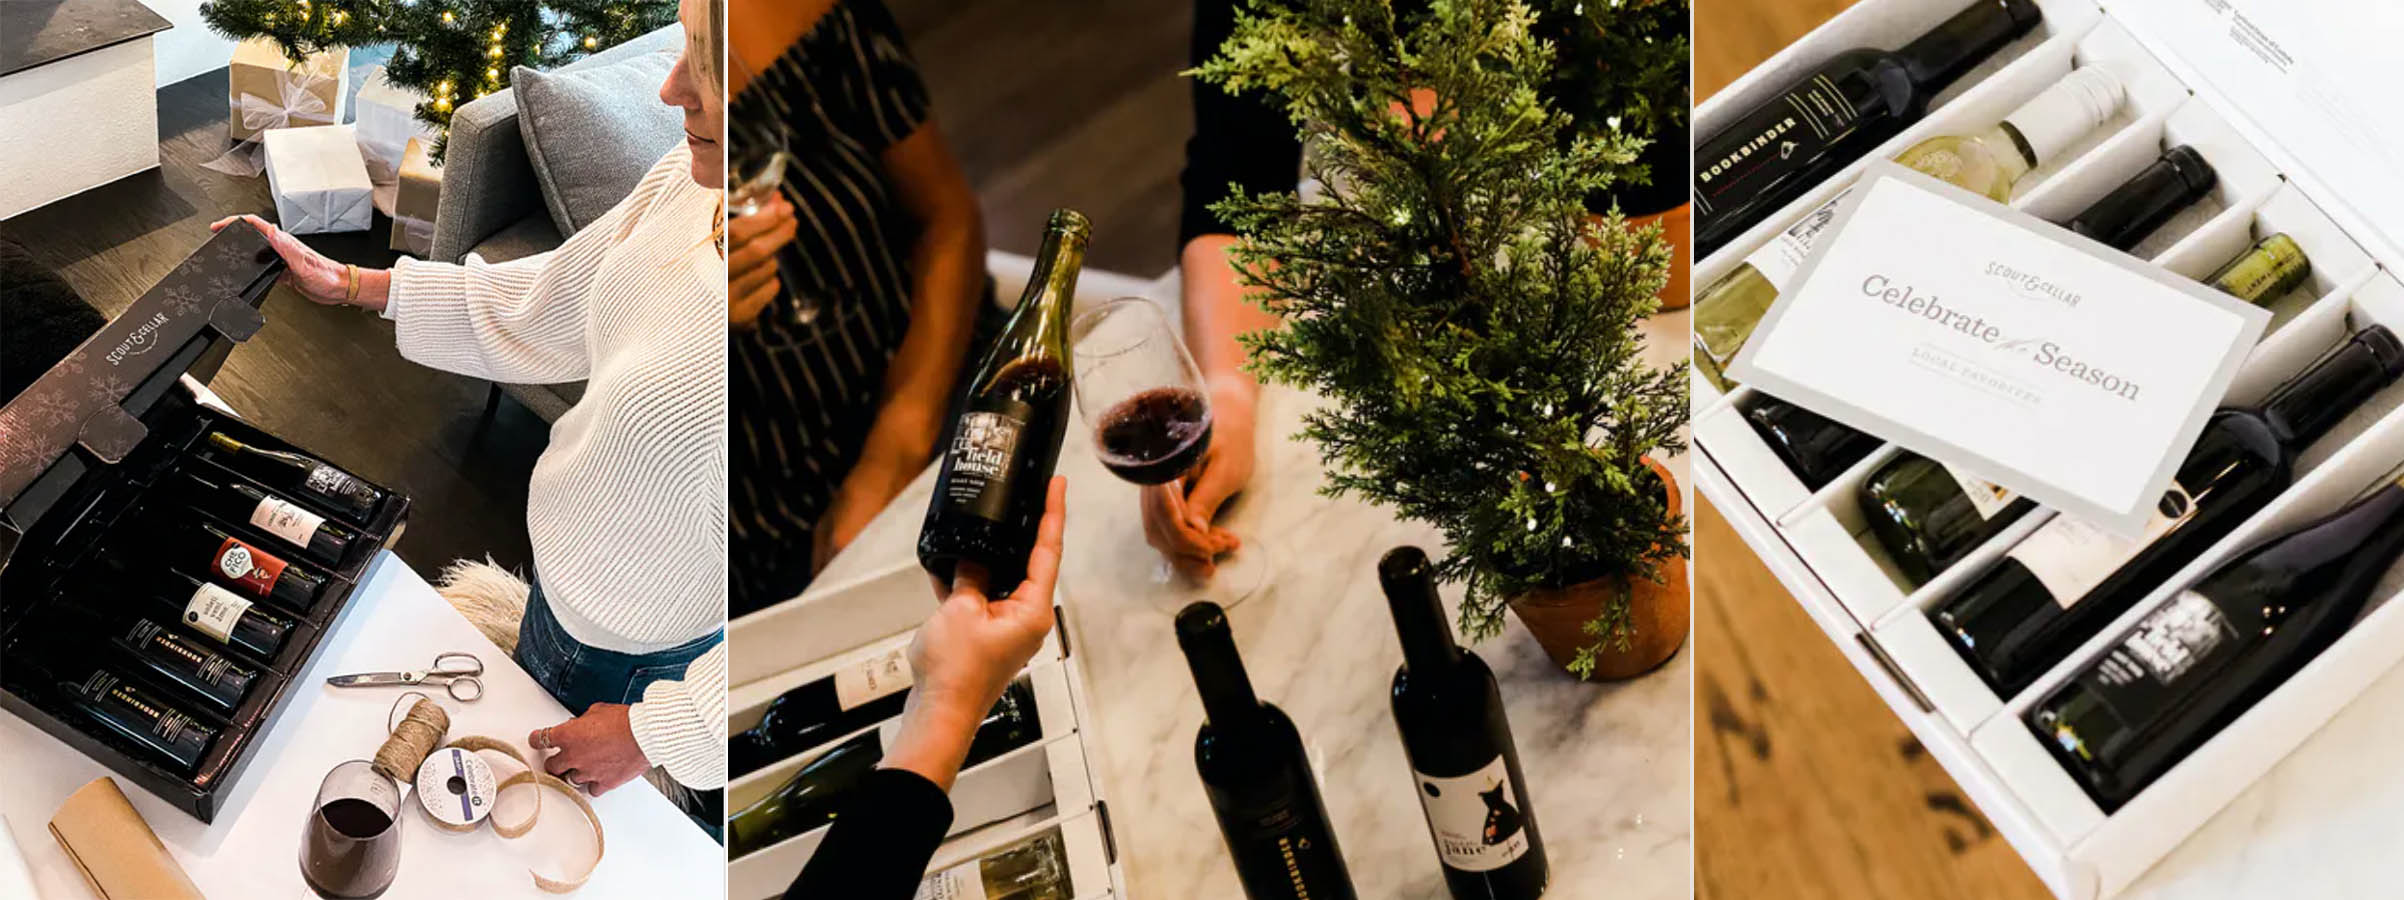 3 images showcasing Scout+Cellar wines at a Christmas Party. Cases with 4 bottles of various wines and people looking at said wine with red wine glasses full of wine.